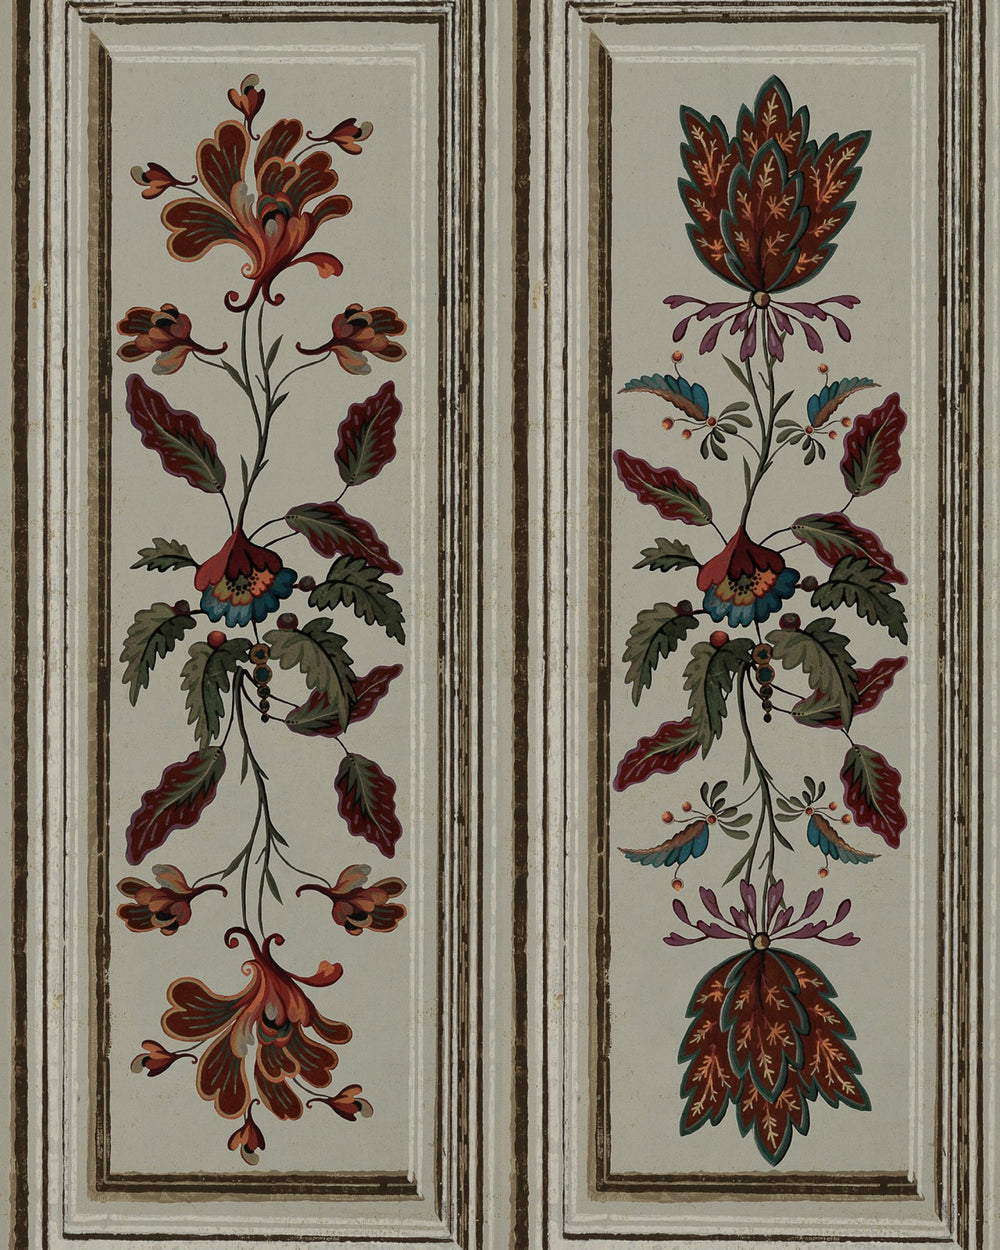 mind-the-gap-tyrol-collection-tyrolean-panels-taupe-shutter-look-wallpaper-floral-print-folklore-style-panel-effect-wall-taupe-red-floral-tulip-cabin-chalet-style